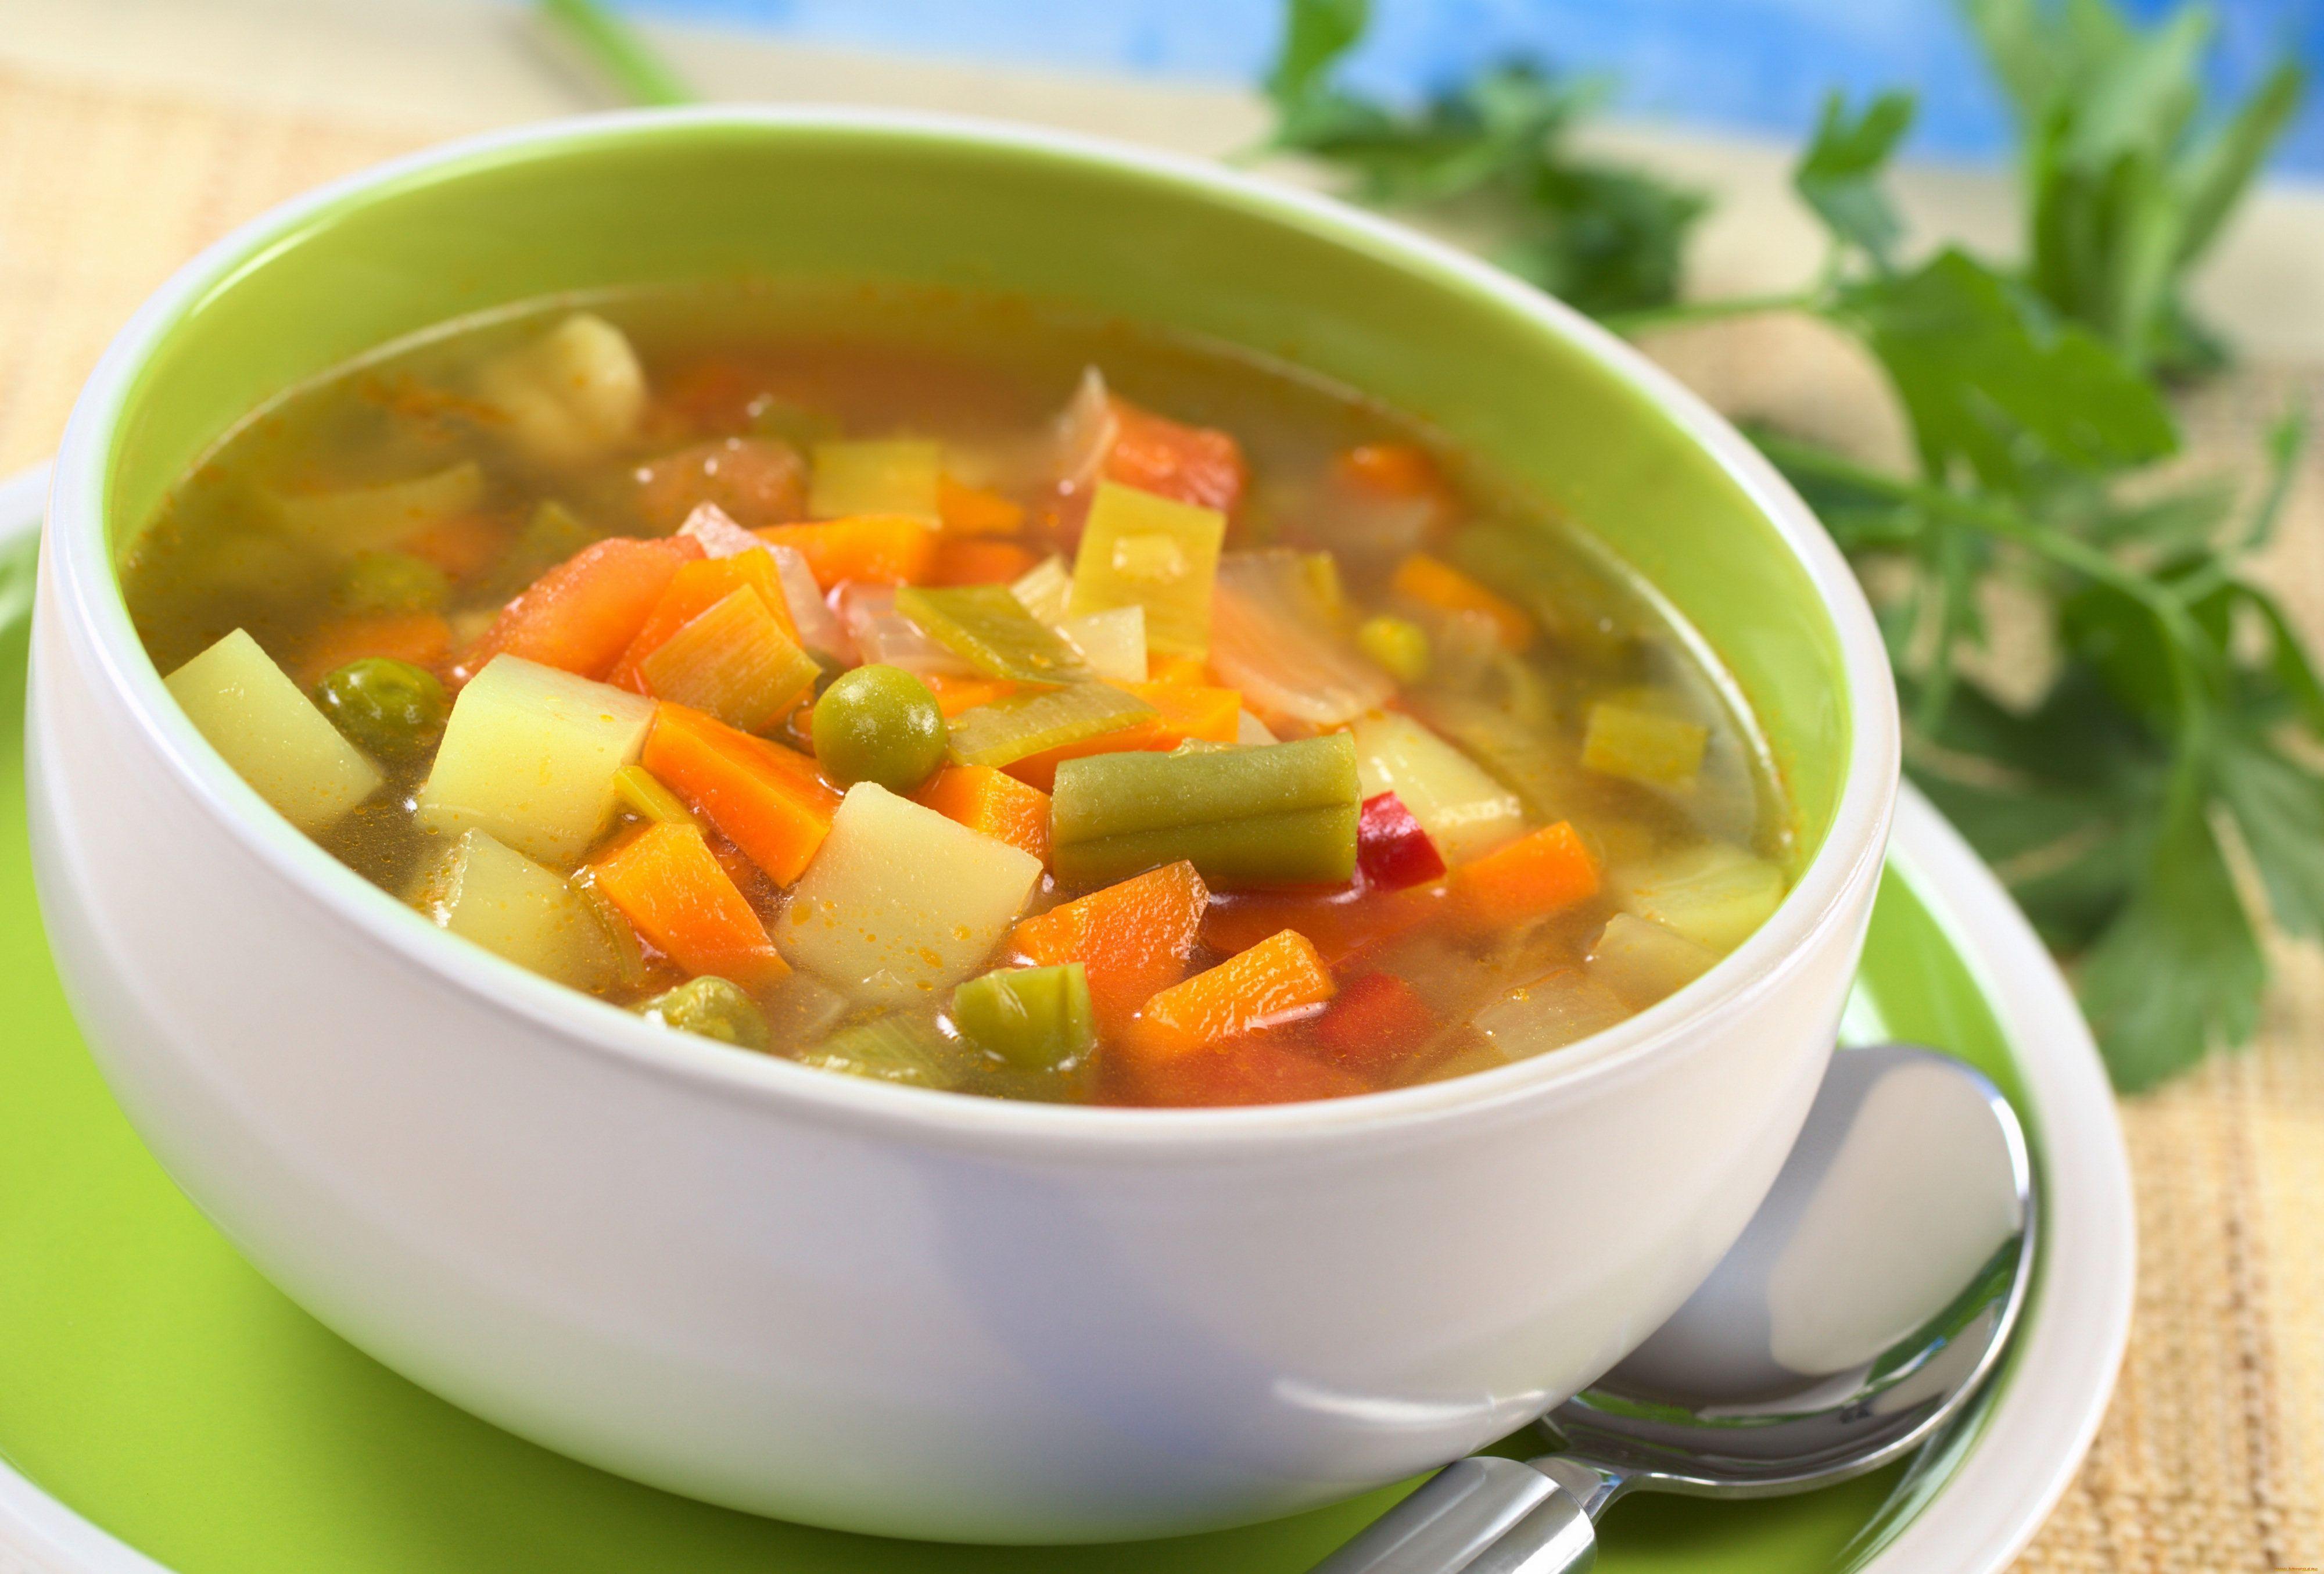 Soup 4k Ultra HD Wallpaper and Background Imagex2709